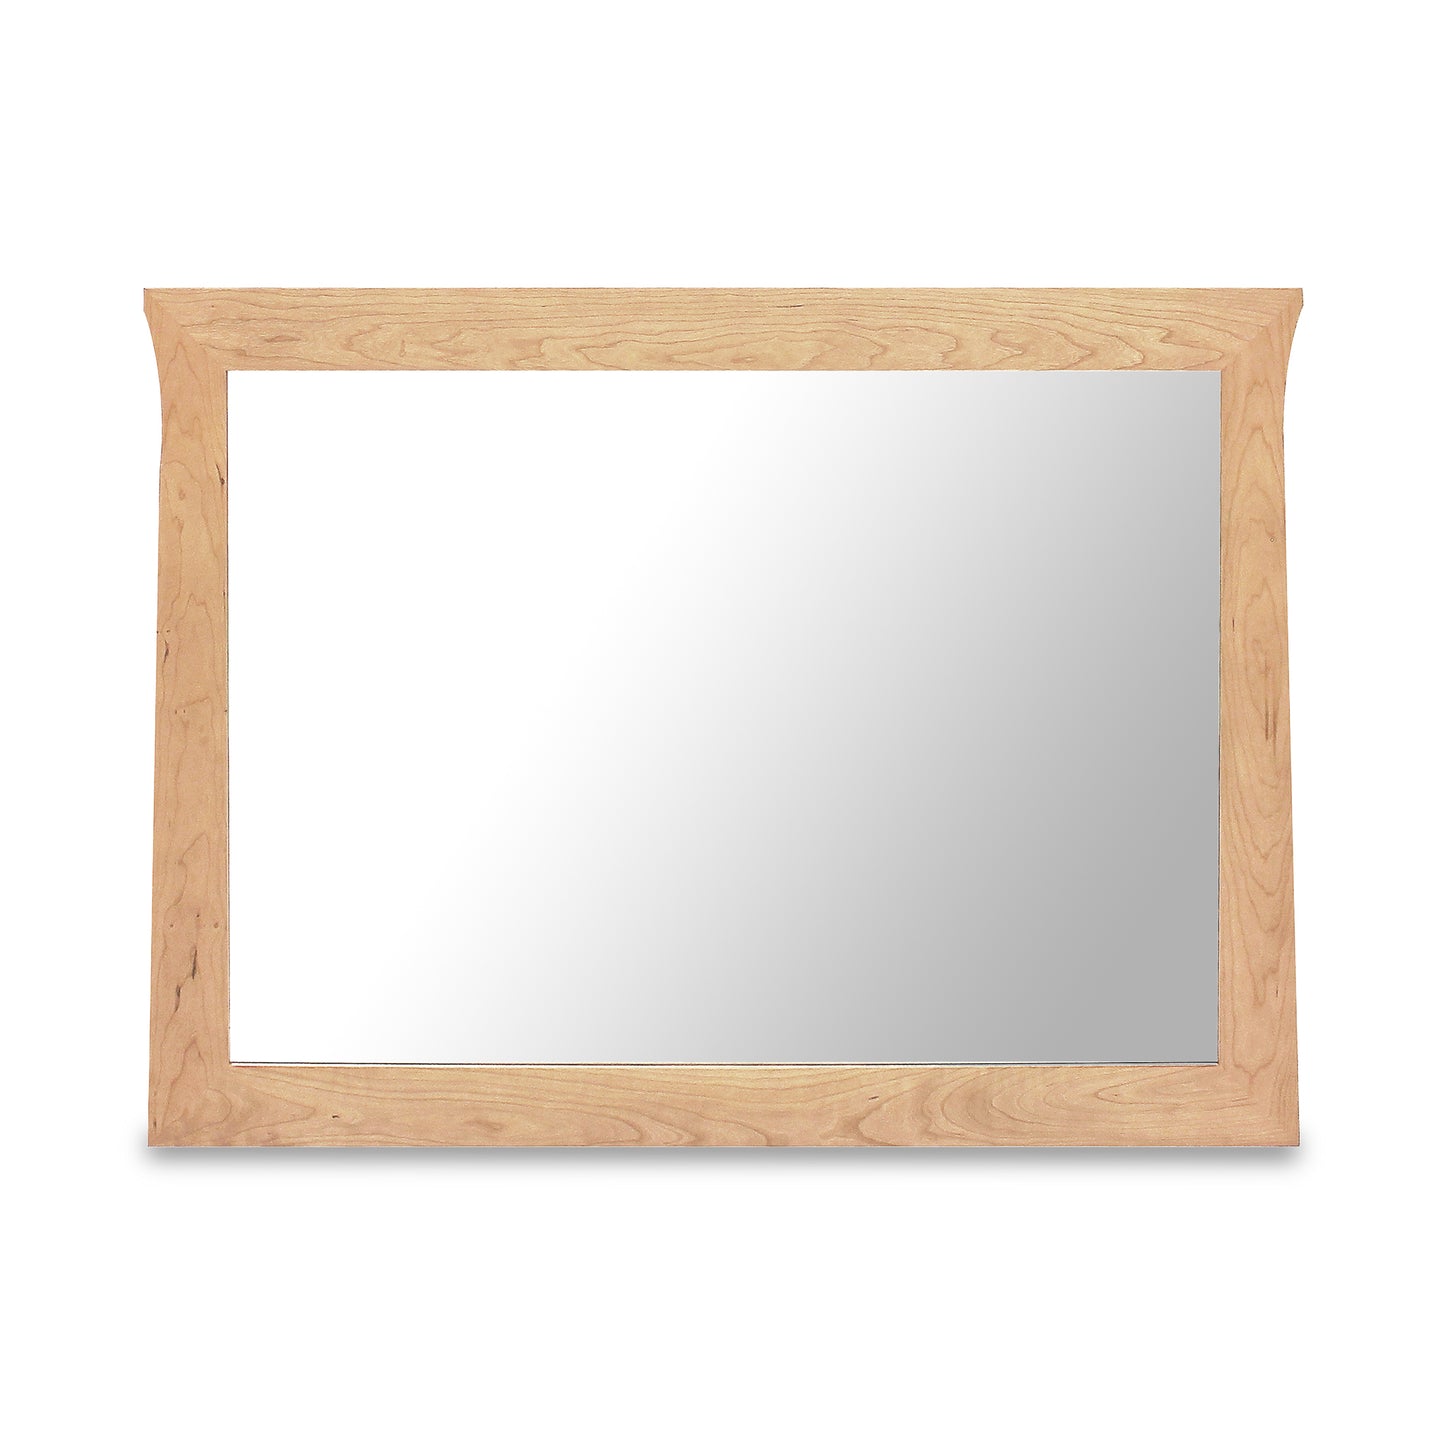 A Lyndon Furniture Andrews Dresser Mirror on a white background.